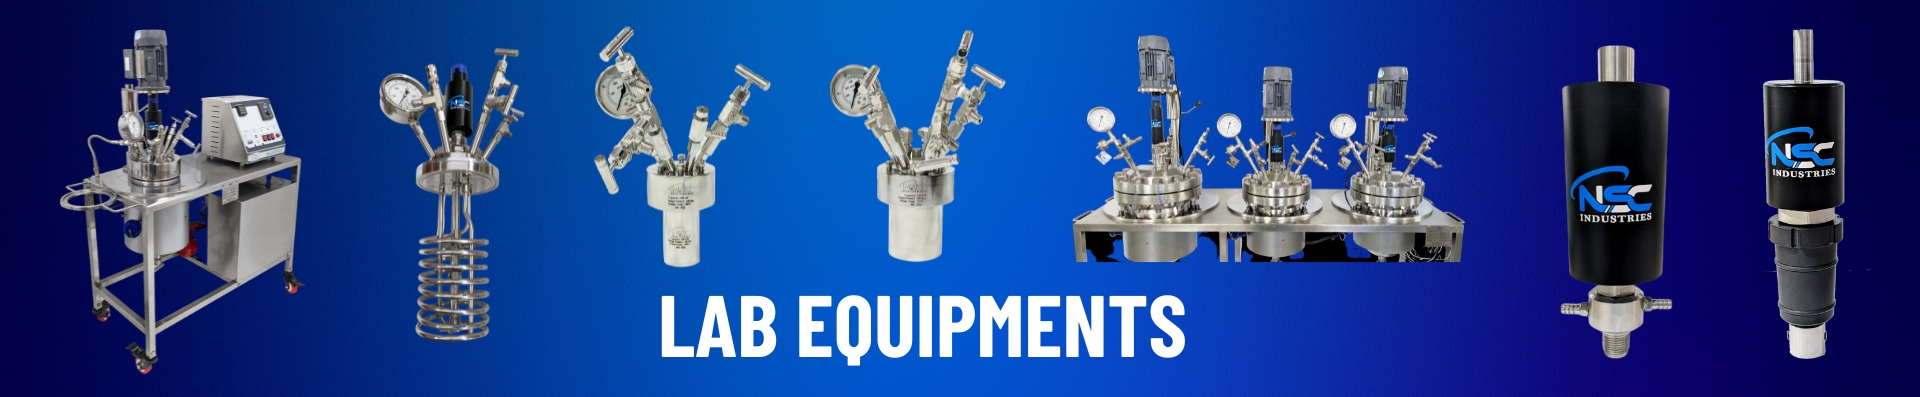 Lab Equipment Manufacturers Suppliers